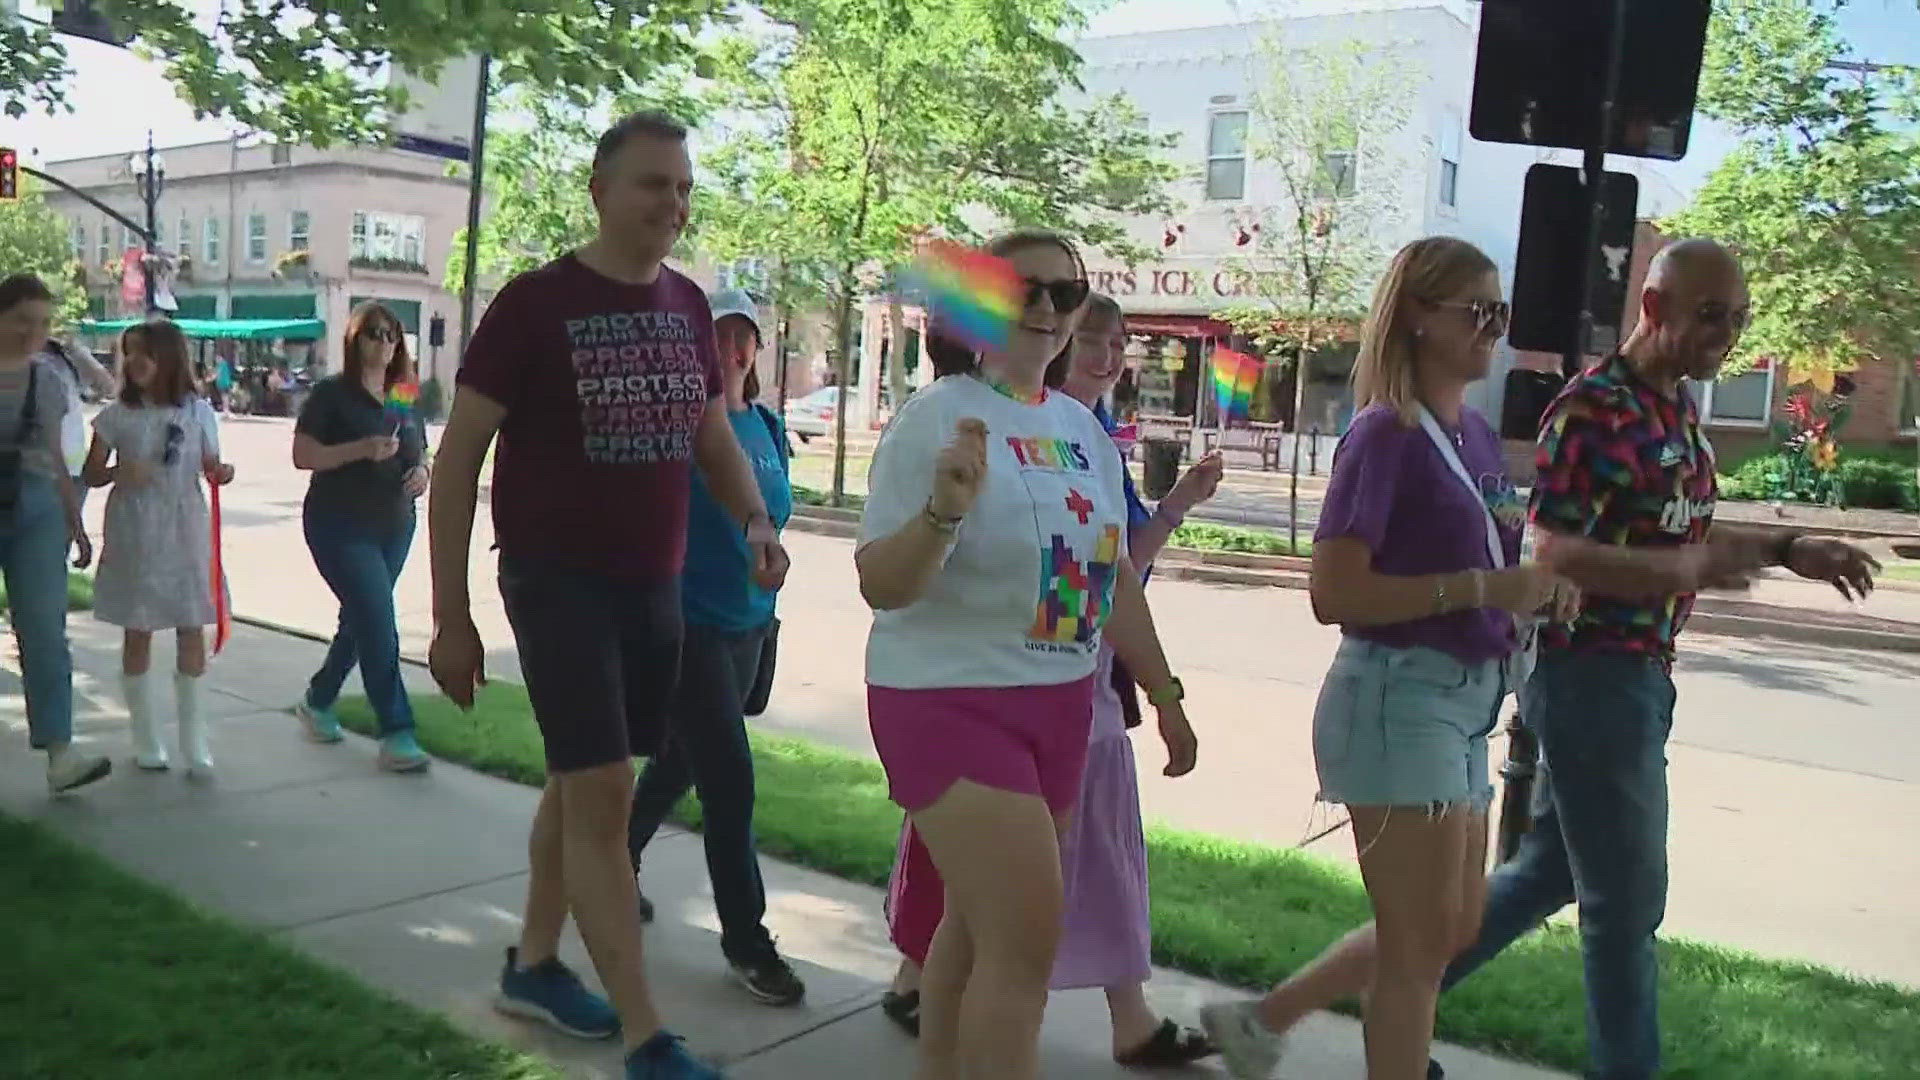 June marks Pride Month, and to celebrate, several communities and businesses in the area are holding events.